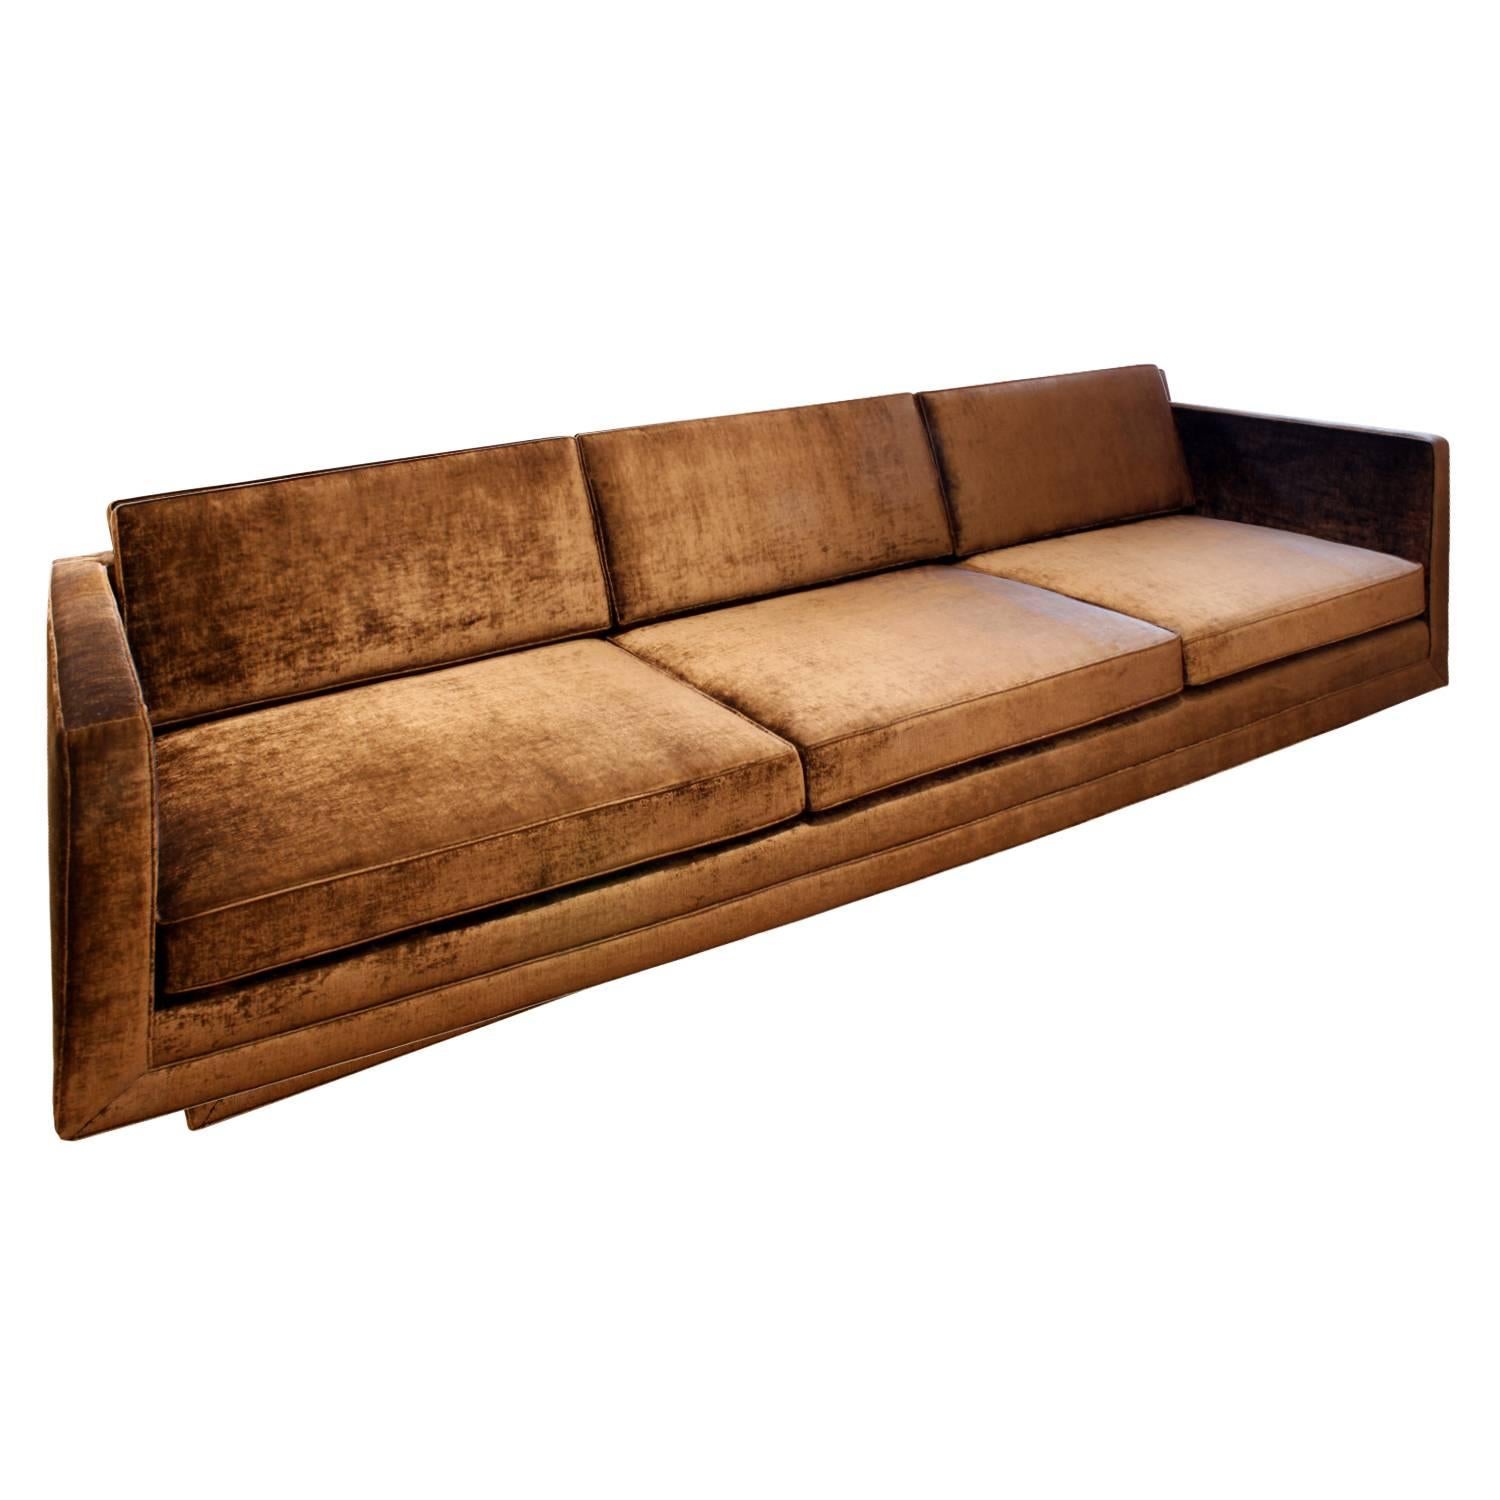 Pair of matching clean line sofas model no. 1257 with recessed mahogany legs by Harvey Probber, American, 1965 (original label read 